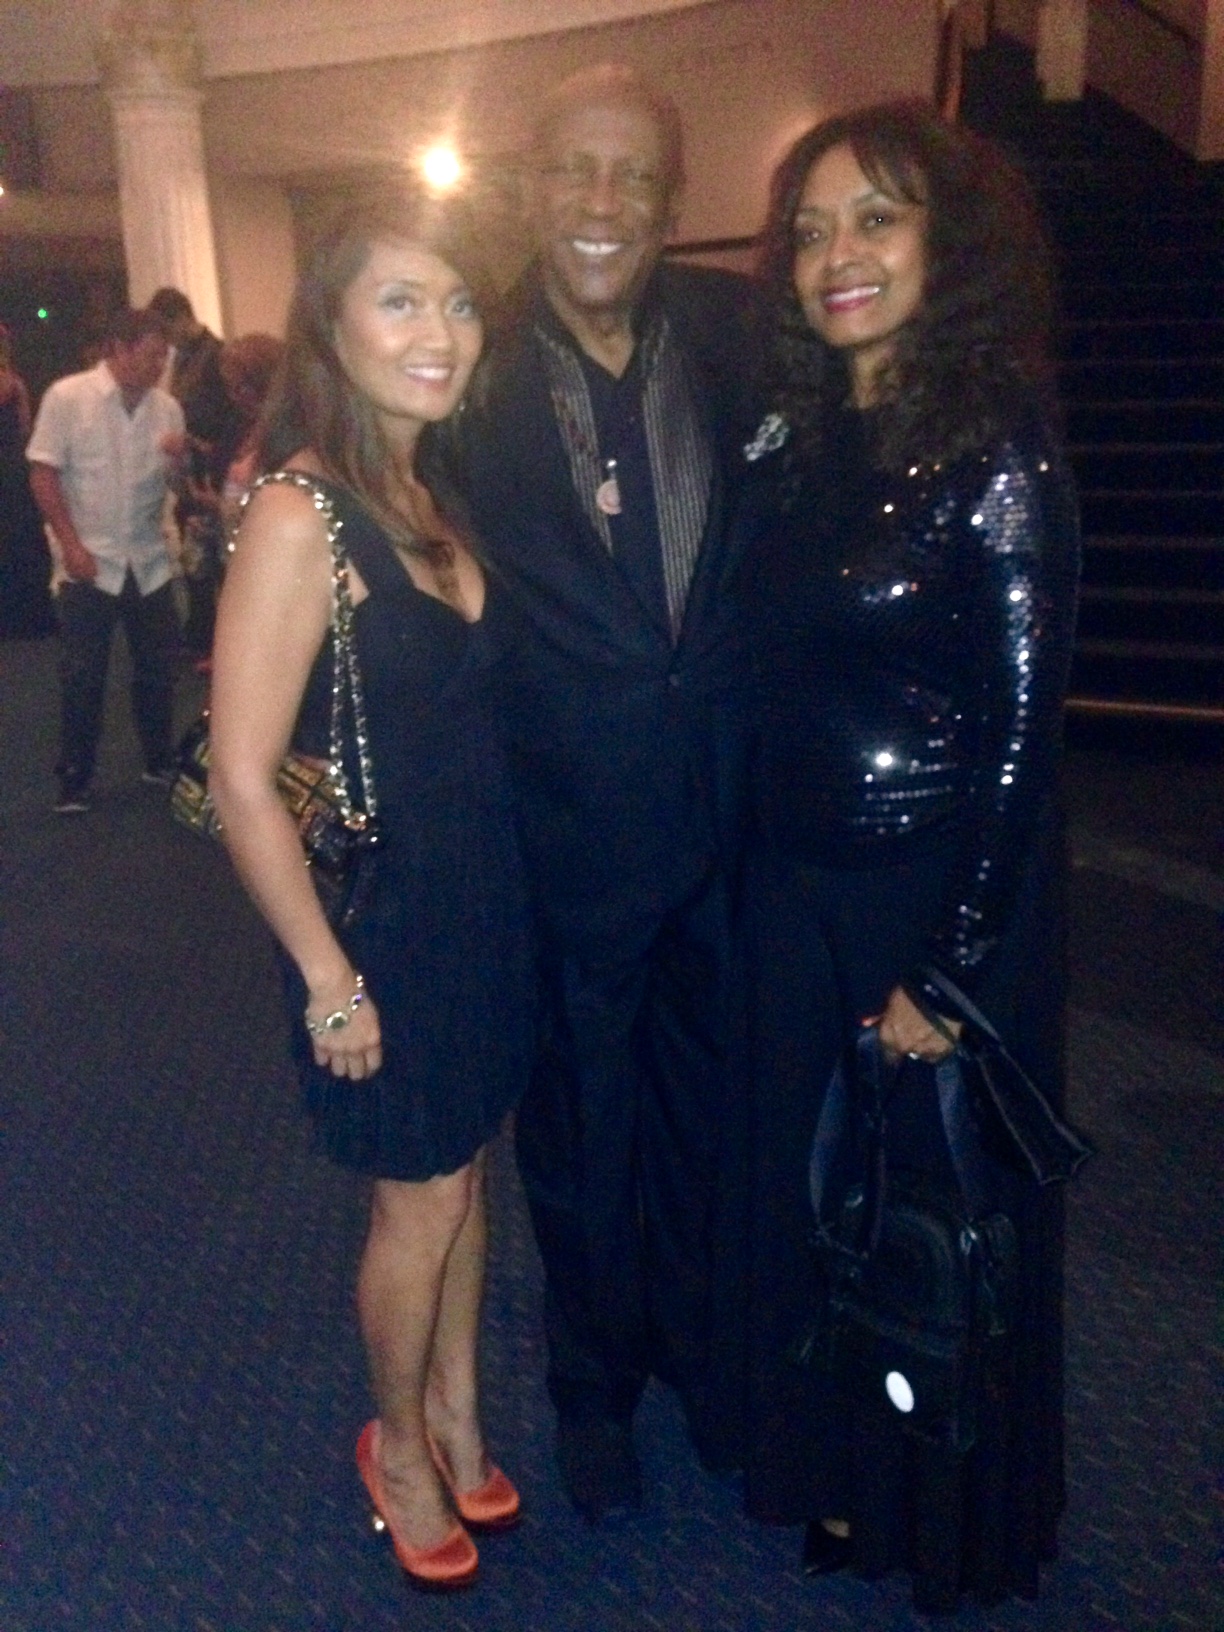 with Louis Gossett Jr and his wife, Shirley at the Intl. Fashion Film Awards 2015